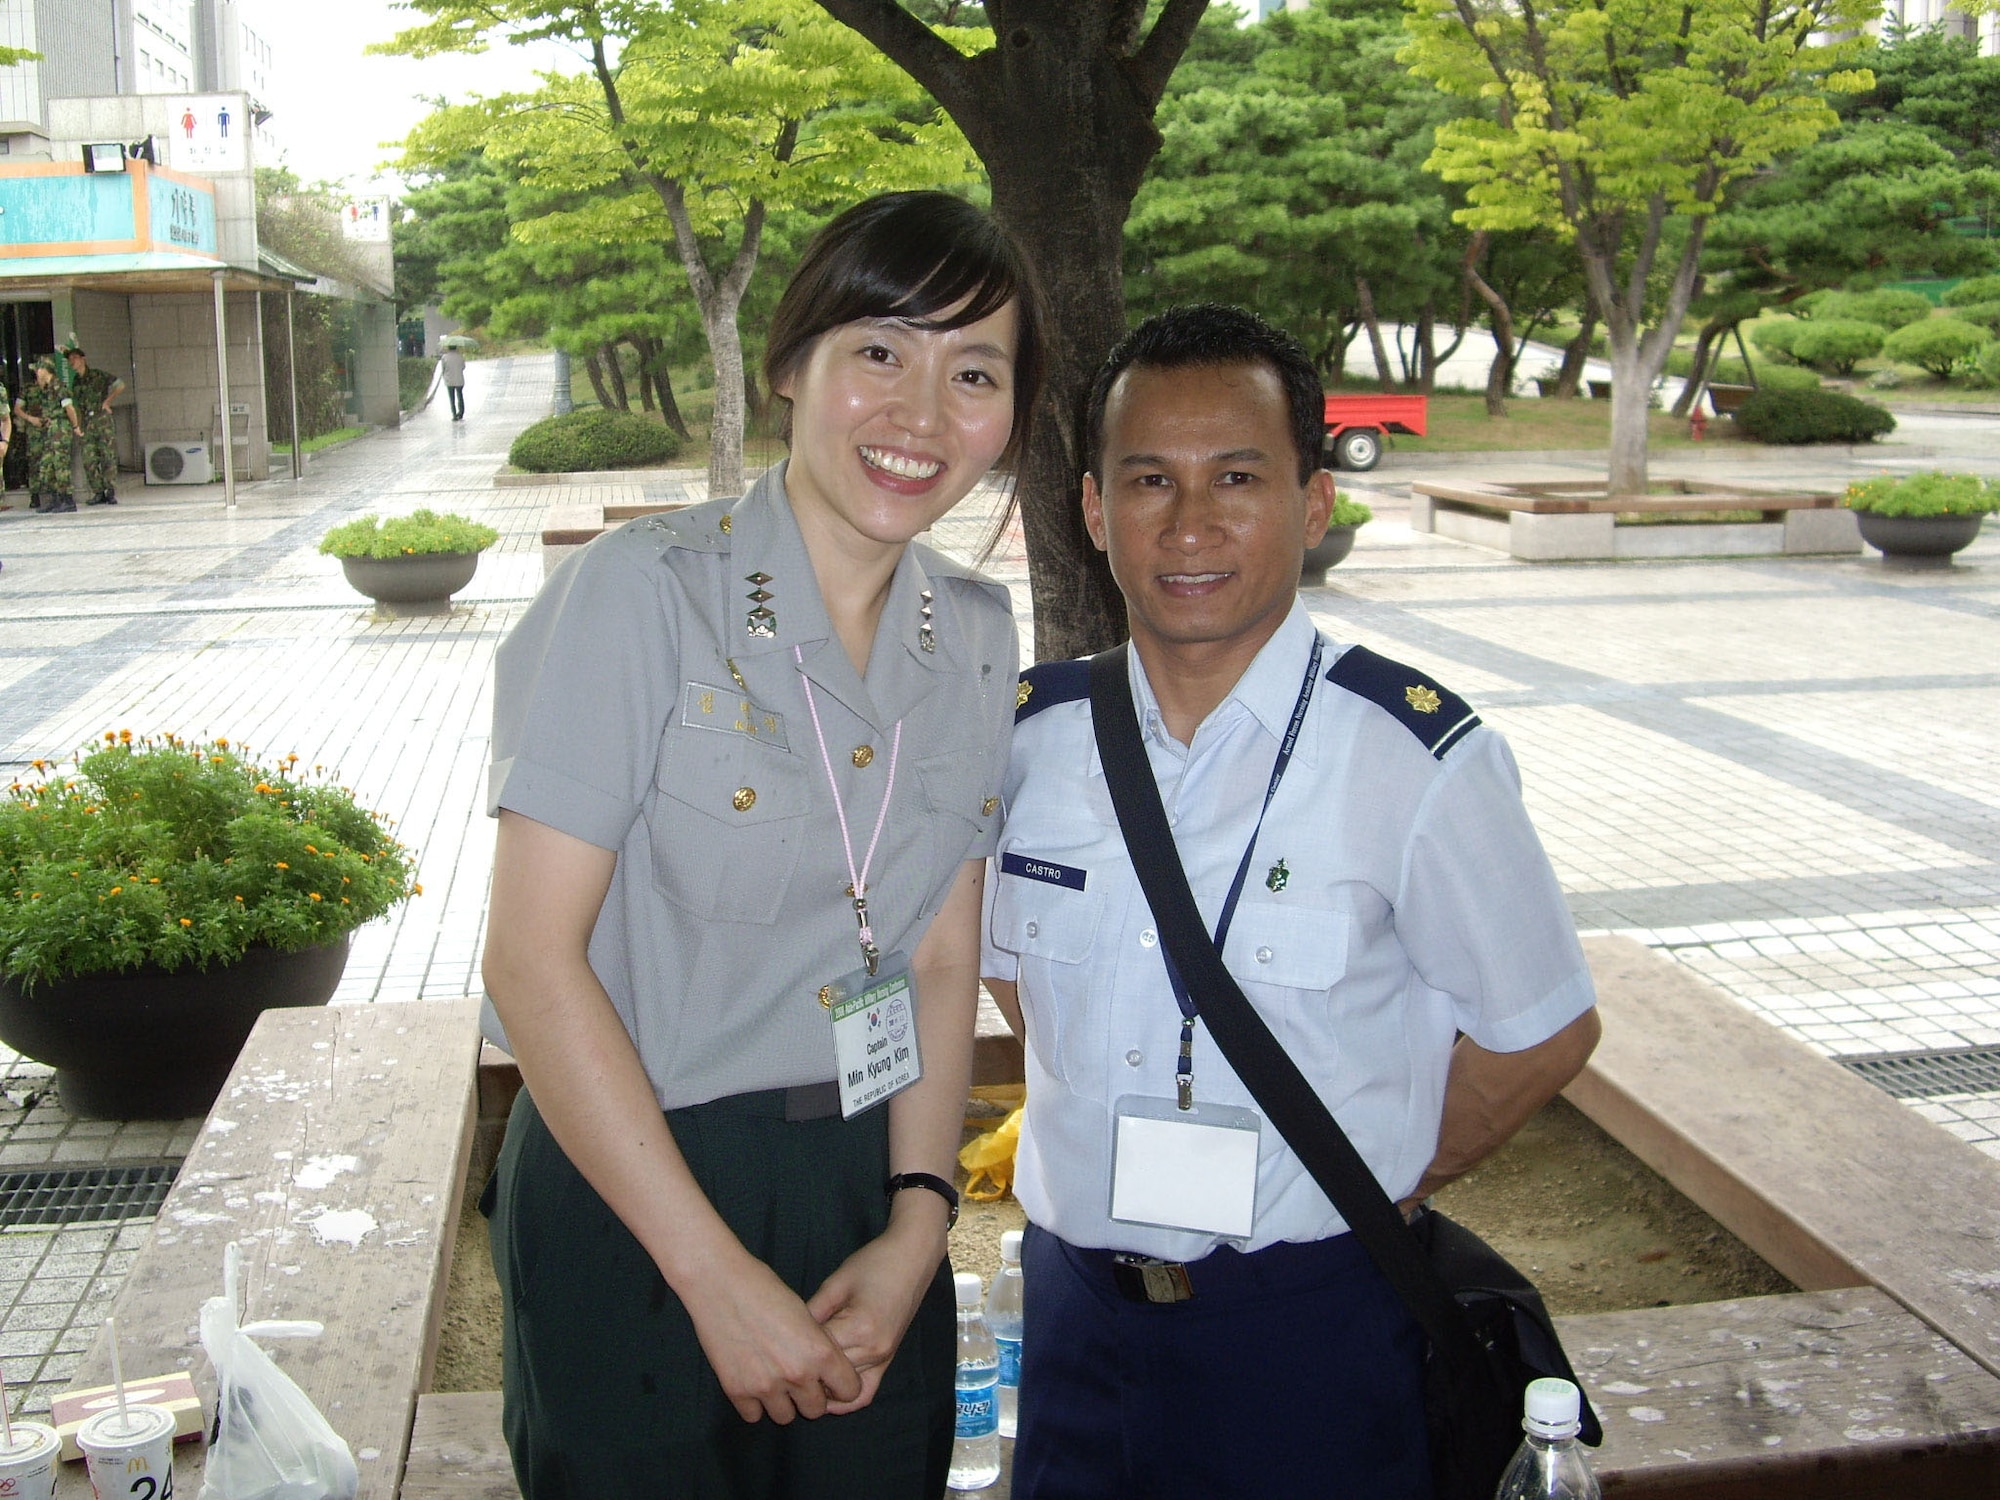 Maj. Edilbert Castro, Air Force Reserve nurse 624th Aeromedical Staging Squadron, gets to know Capt. Min Kyung Kim, Republic of Korea Army nusing officer, at the second annual Asia Pacific  Military Nursing Conference. Major Castro was one of more than 40 Air Force, Army and Navy nurses and medical professionals who attended the conference with attendees from seven countries Sept. 1-5 at the Korea Armed Forces Nursing Academy in Daejeon, Republic of Korea. The 624th ASTS is part of the 624th Regional Support Group, Hickam Air Force Base, Hawaii.